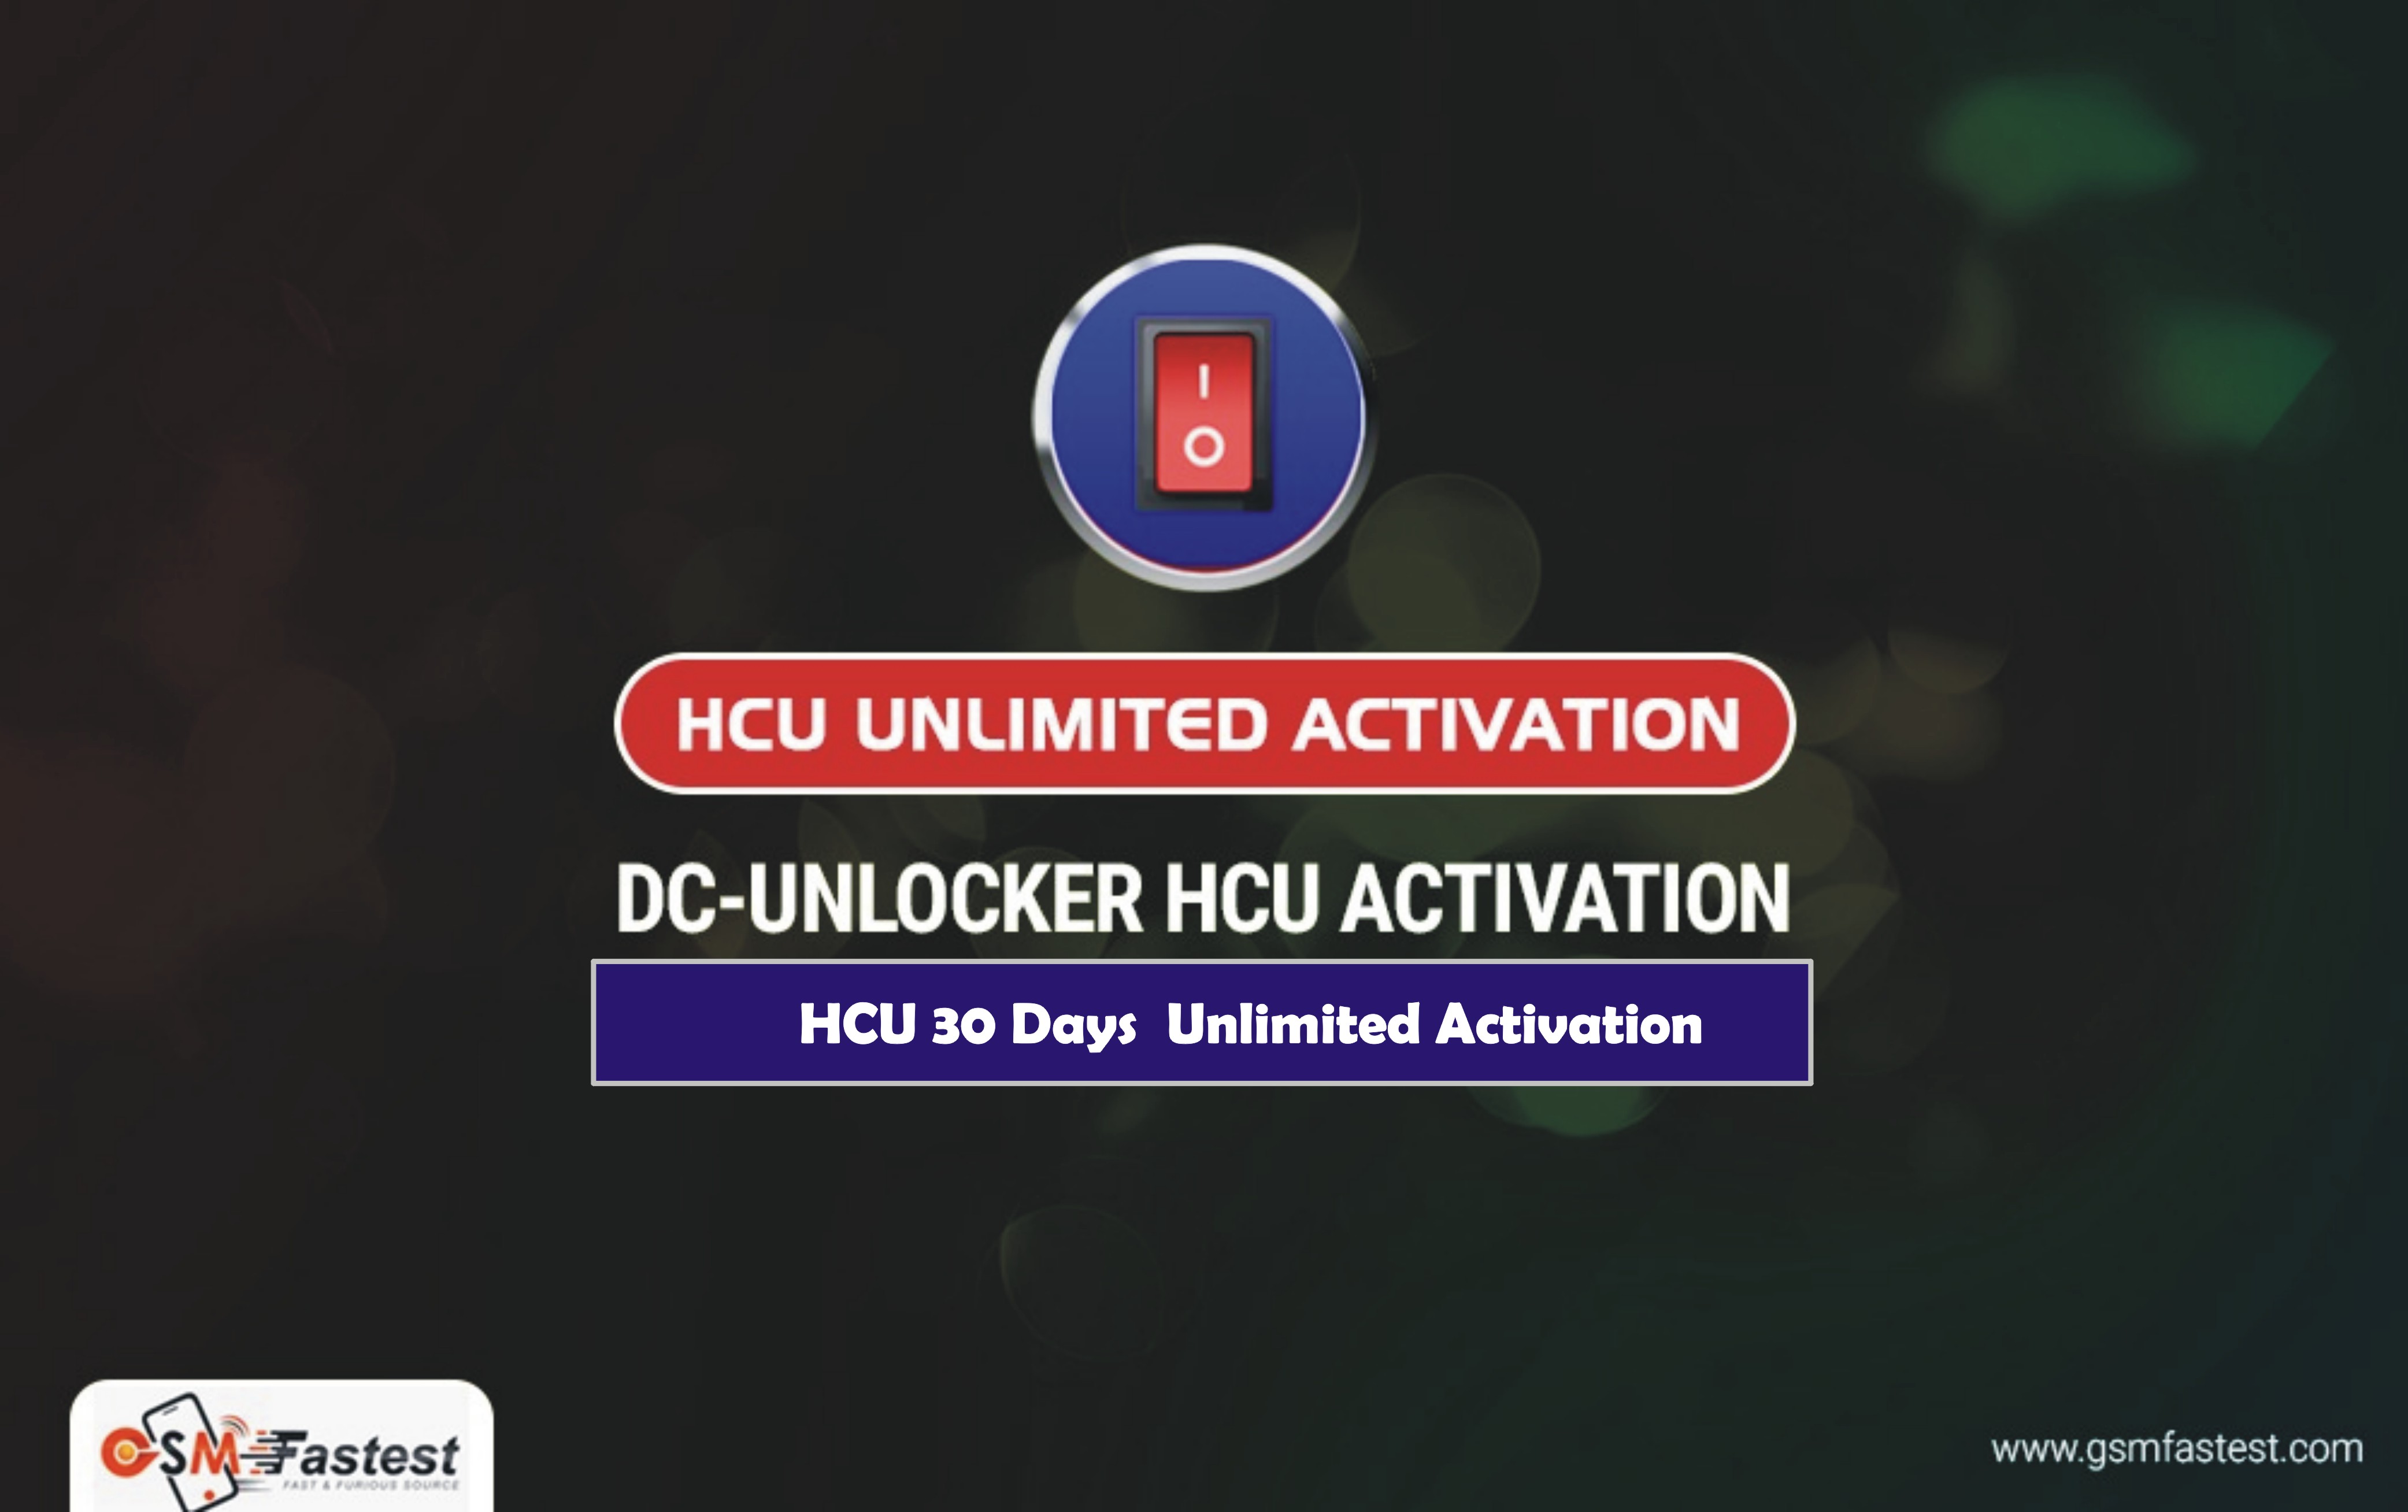 HCU Unlimited Activation For 30 Days Only